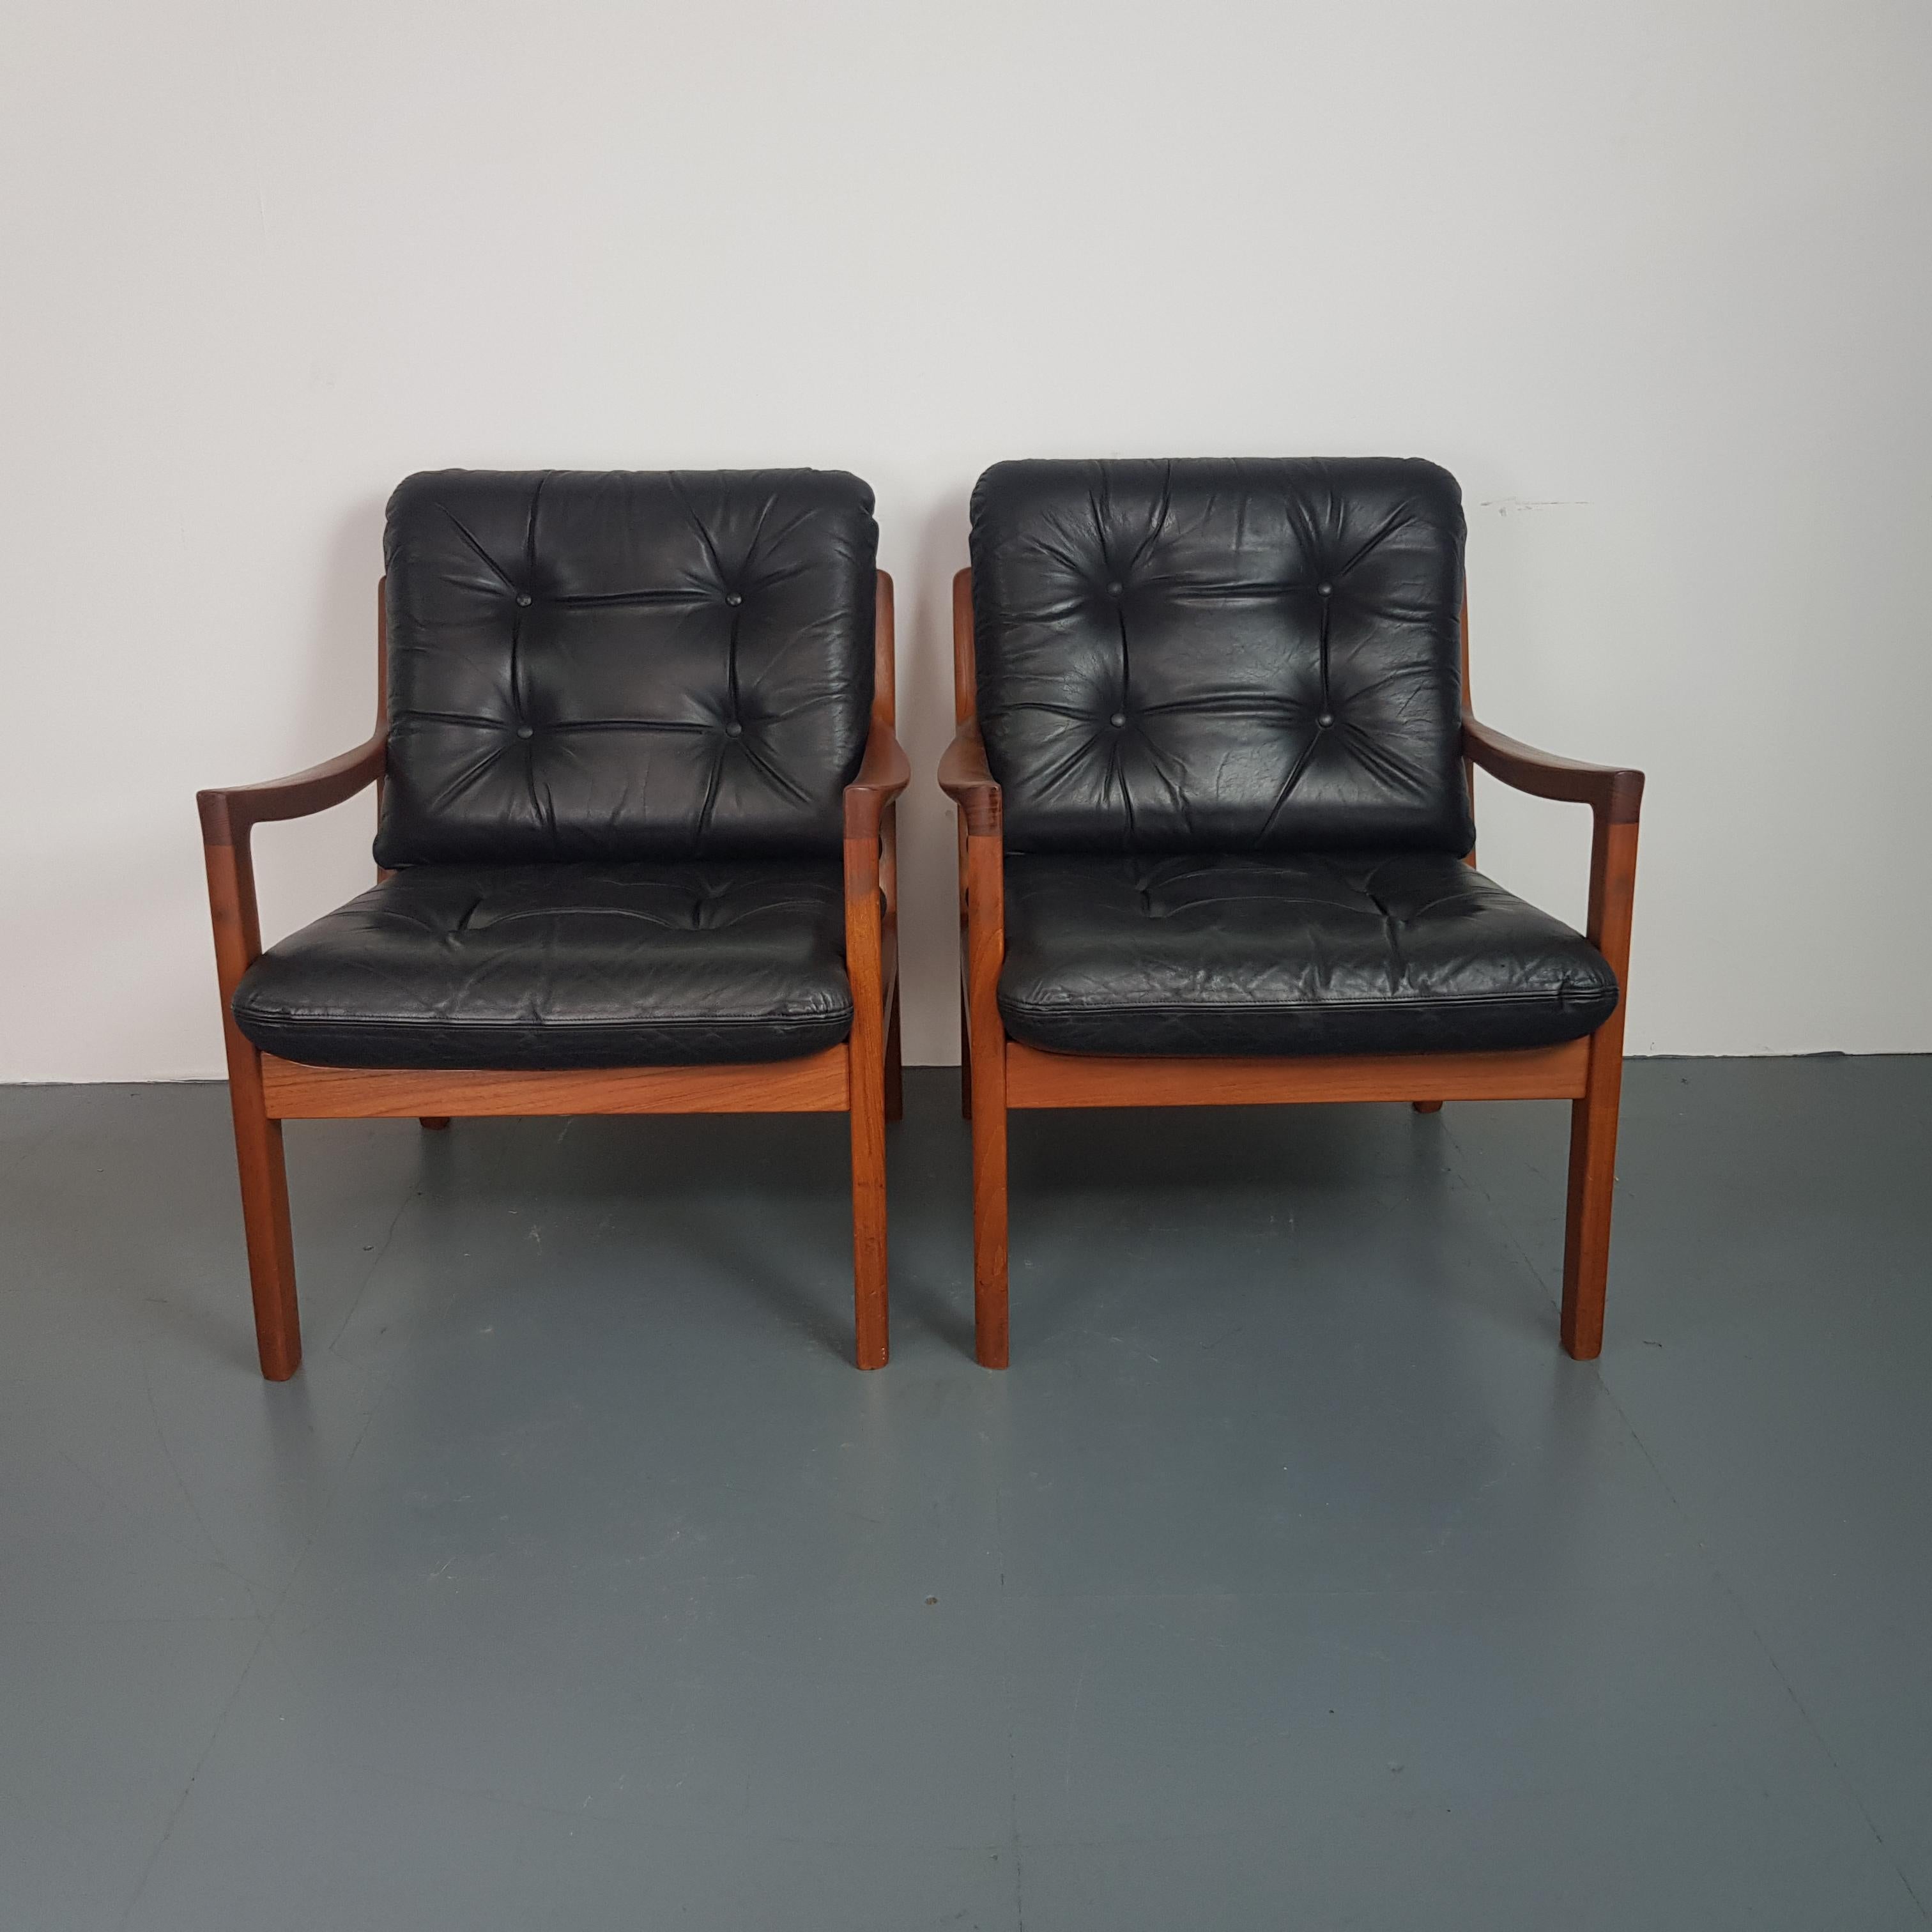 Pair of Ole Wanscher for France & Son Denmark, 1960s Teak Lounge Chairs Leather In Good Condition For Sale In Lewes, East Sussex